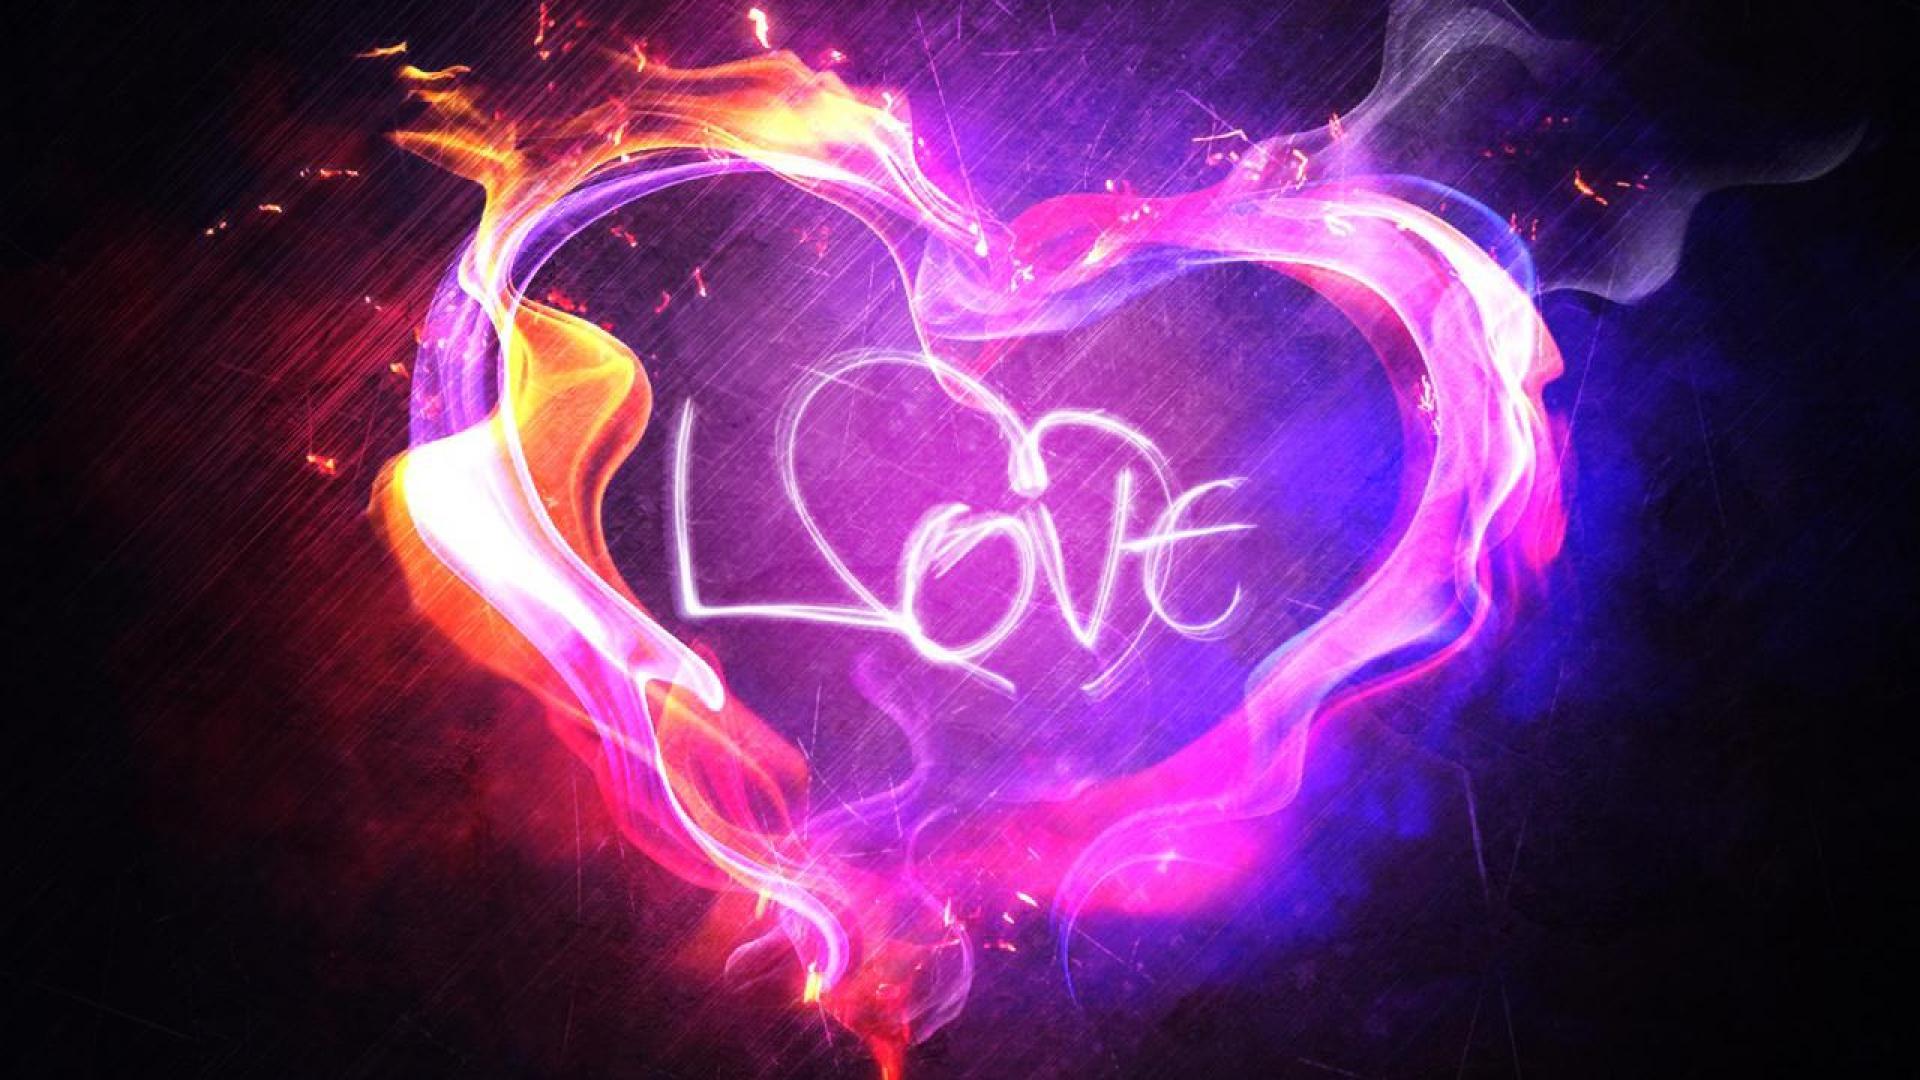 Fire Wallpaper PNG Picture, Heart Fire Wallpaper, Fire, Heart, Heart Of Fire  PNG Image For Free Download